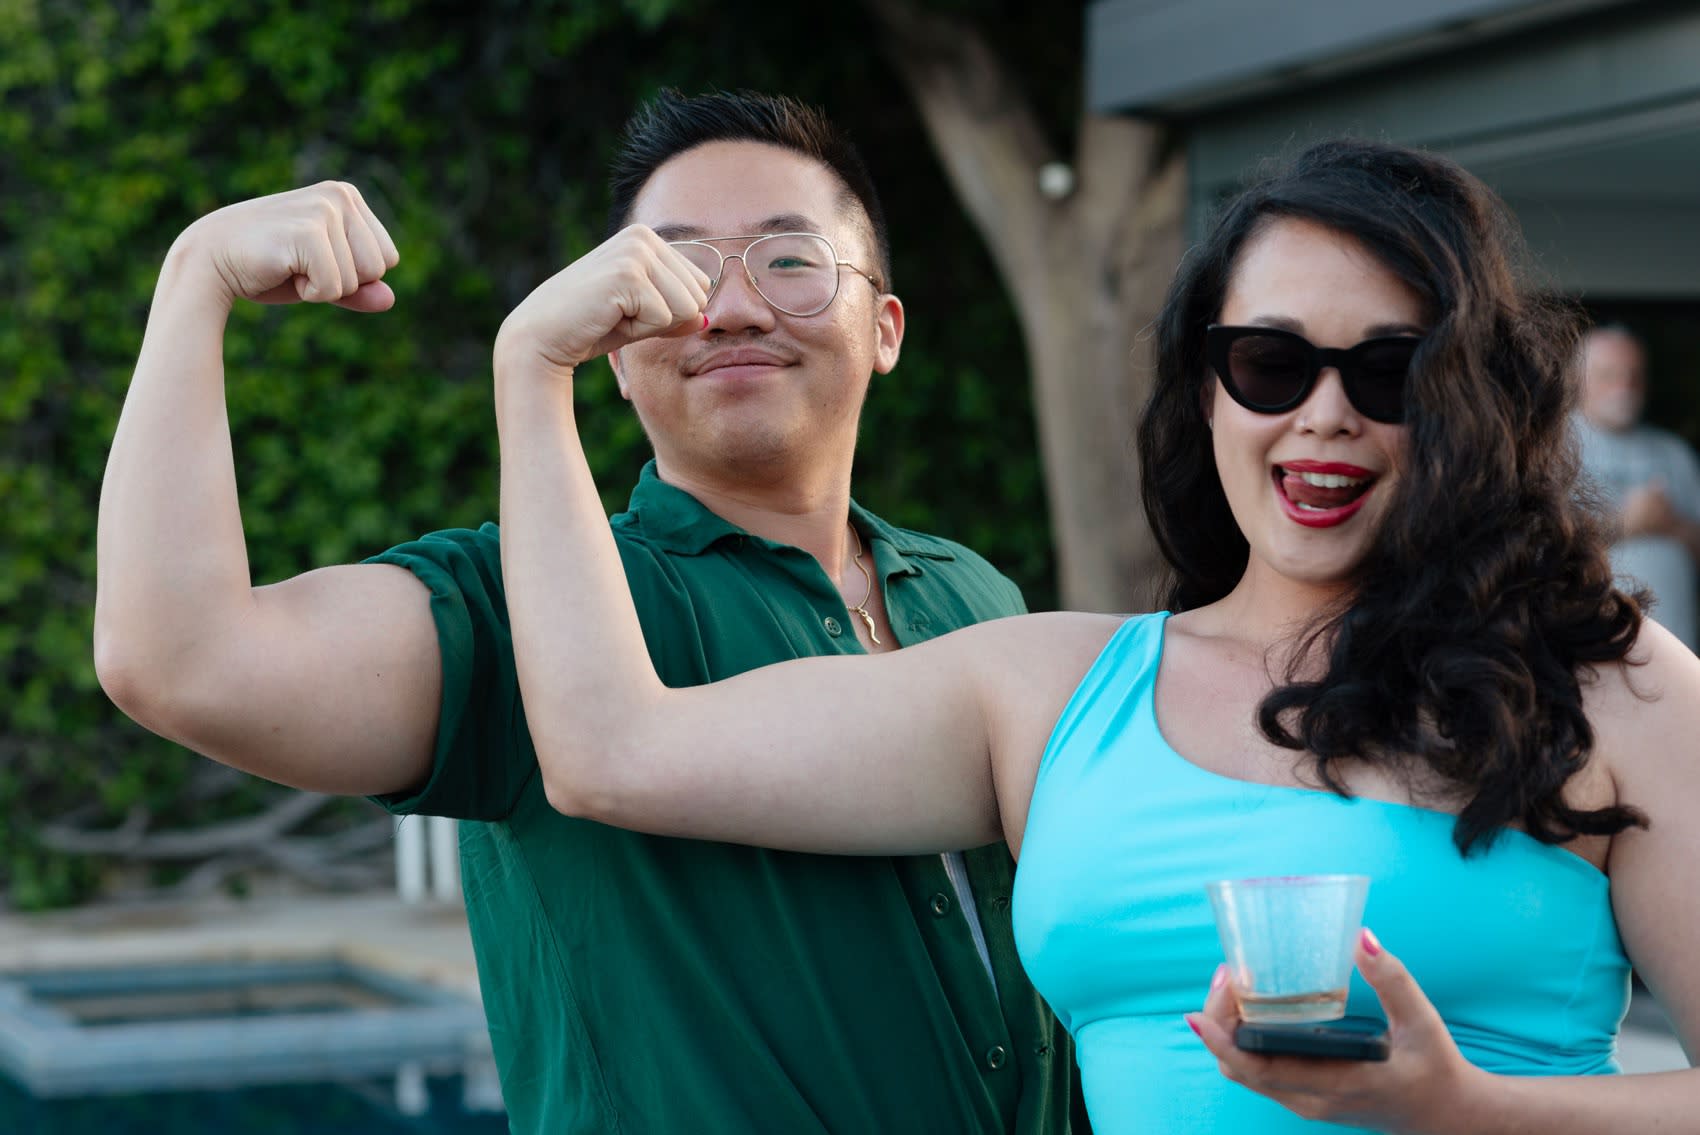 Justin Yoon and Dasha Matsuura flex their biceps in front of an outdoor pool on a summer day